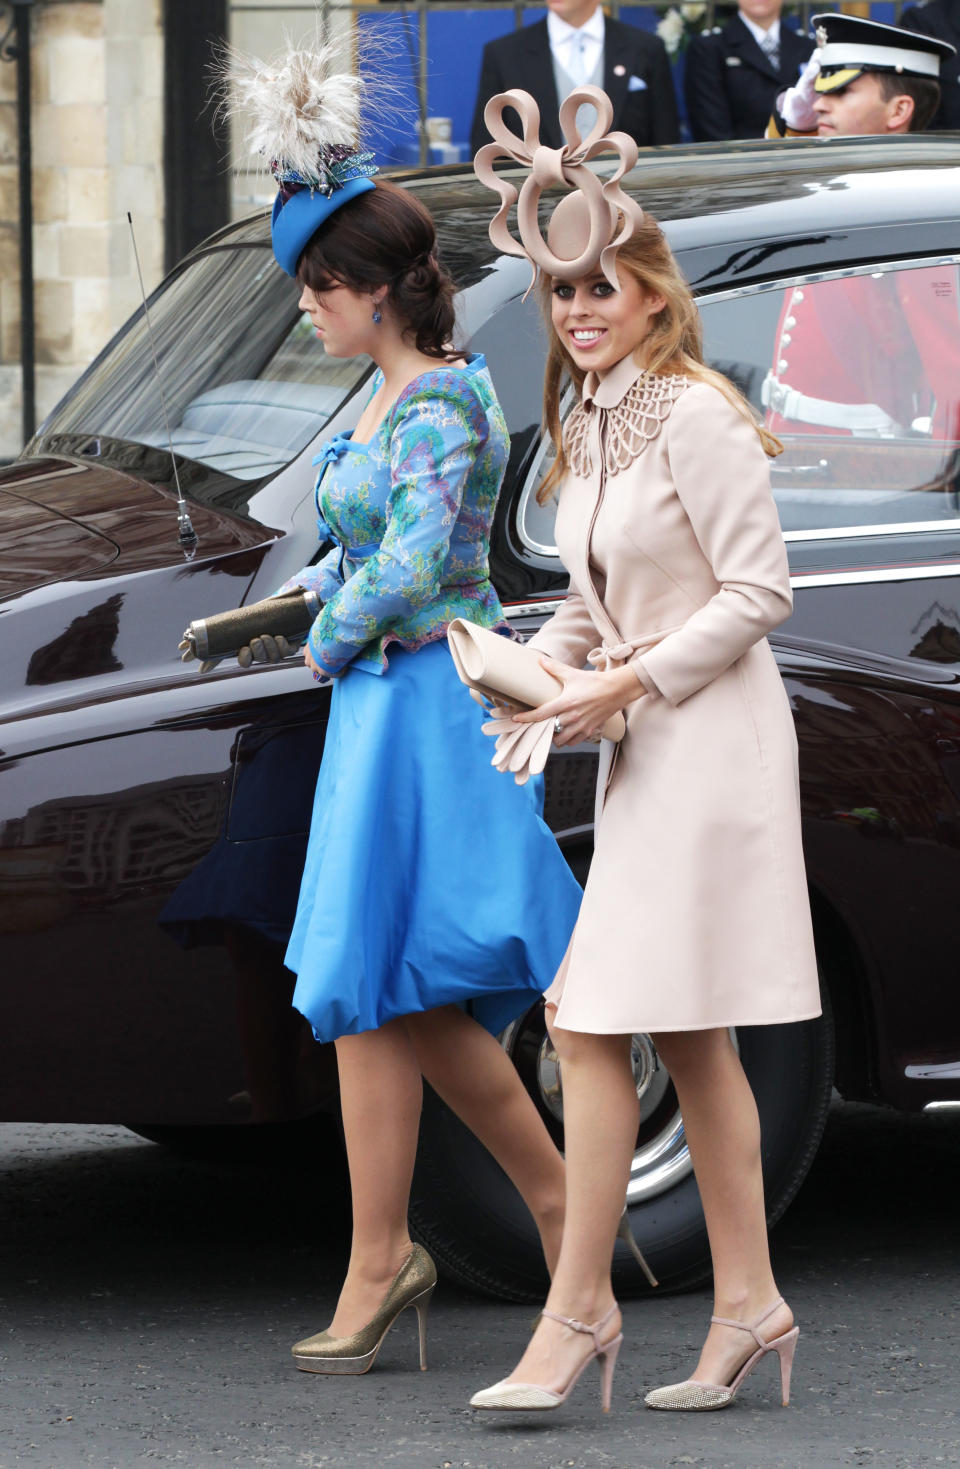 Princess Beatrice and Princess Eugenie attend Wills and Kate's royal wedding in famously bad fascinators and dresses